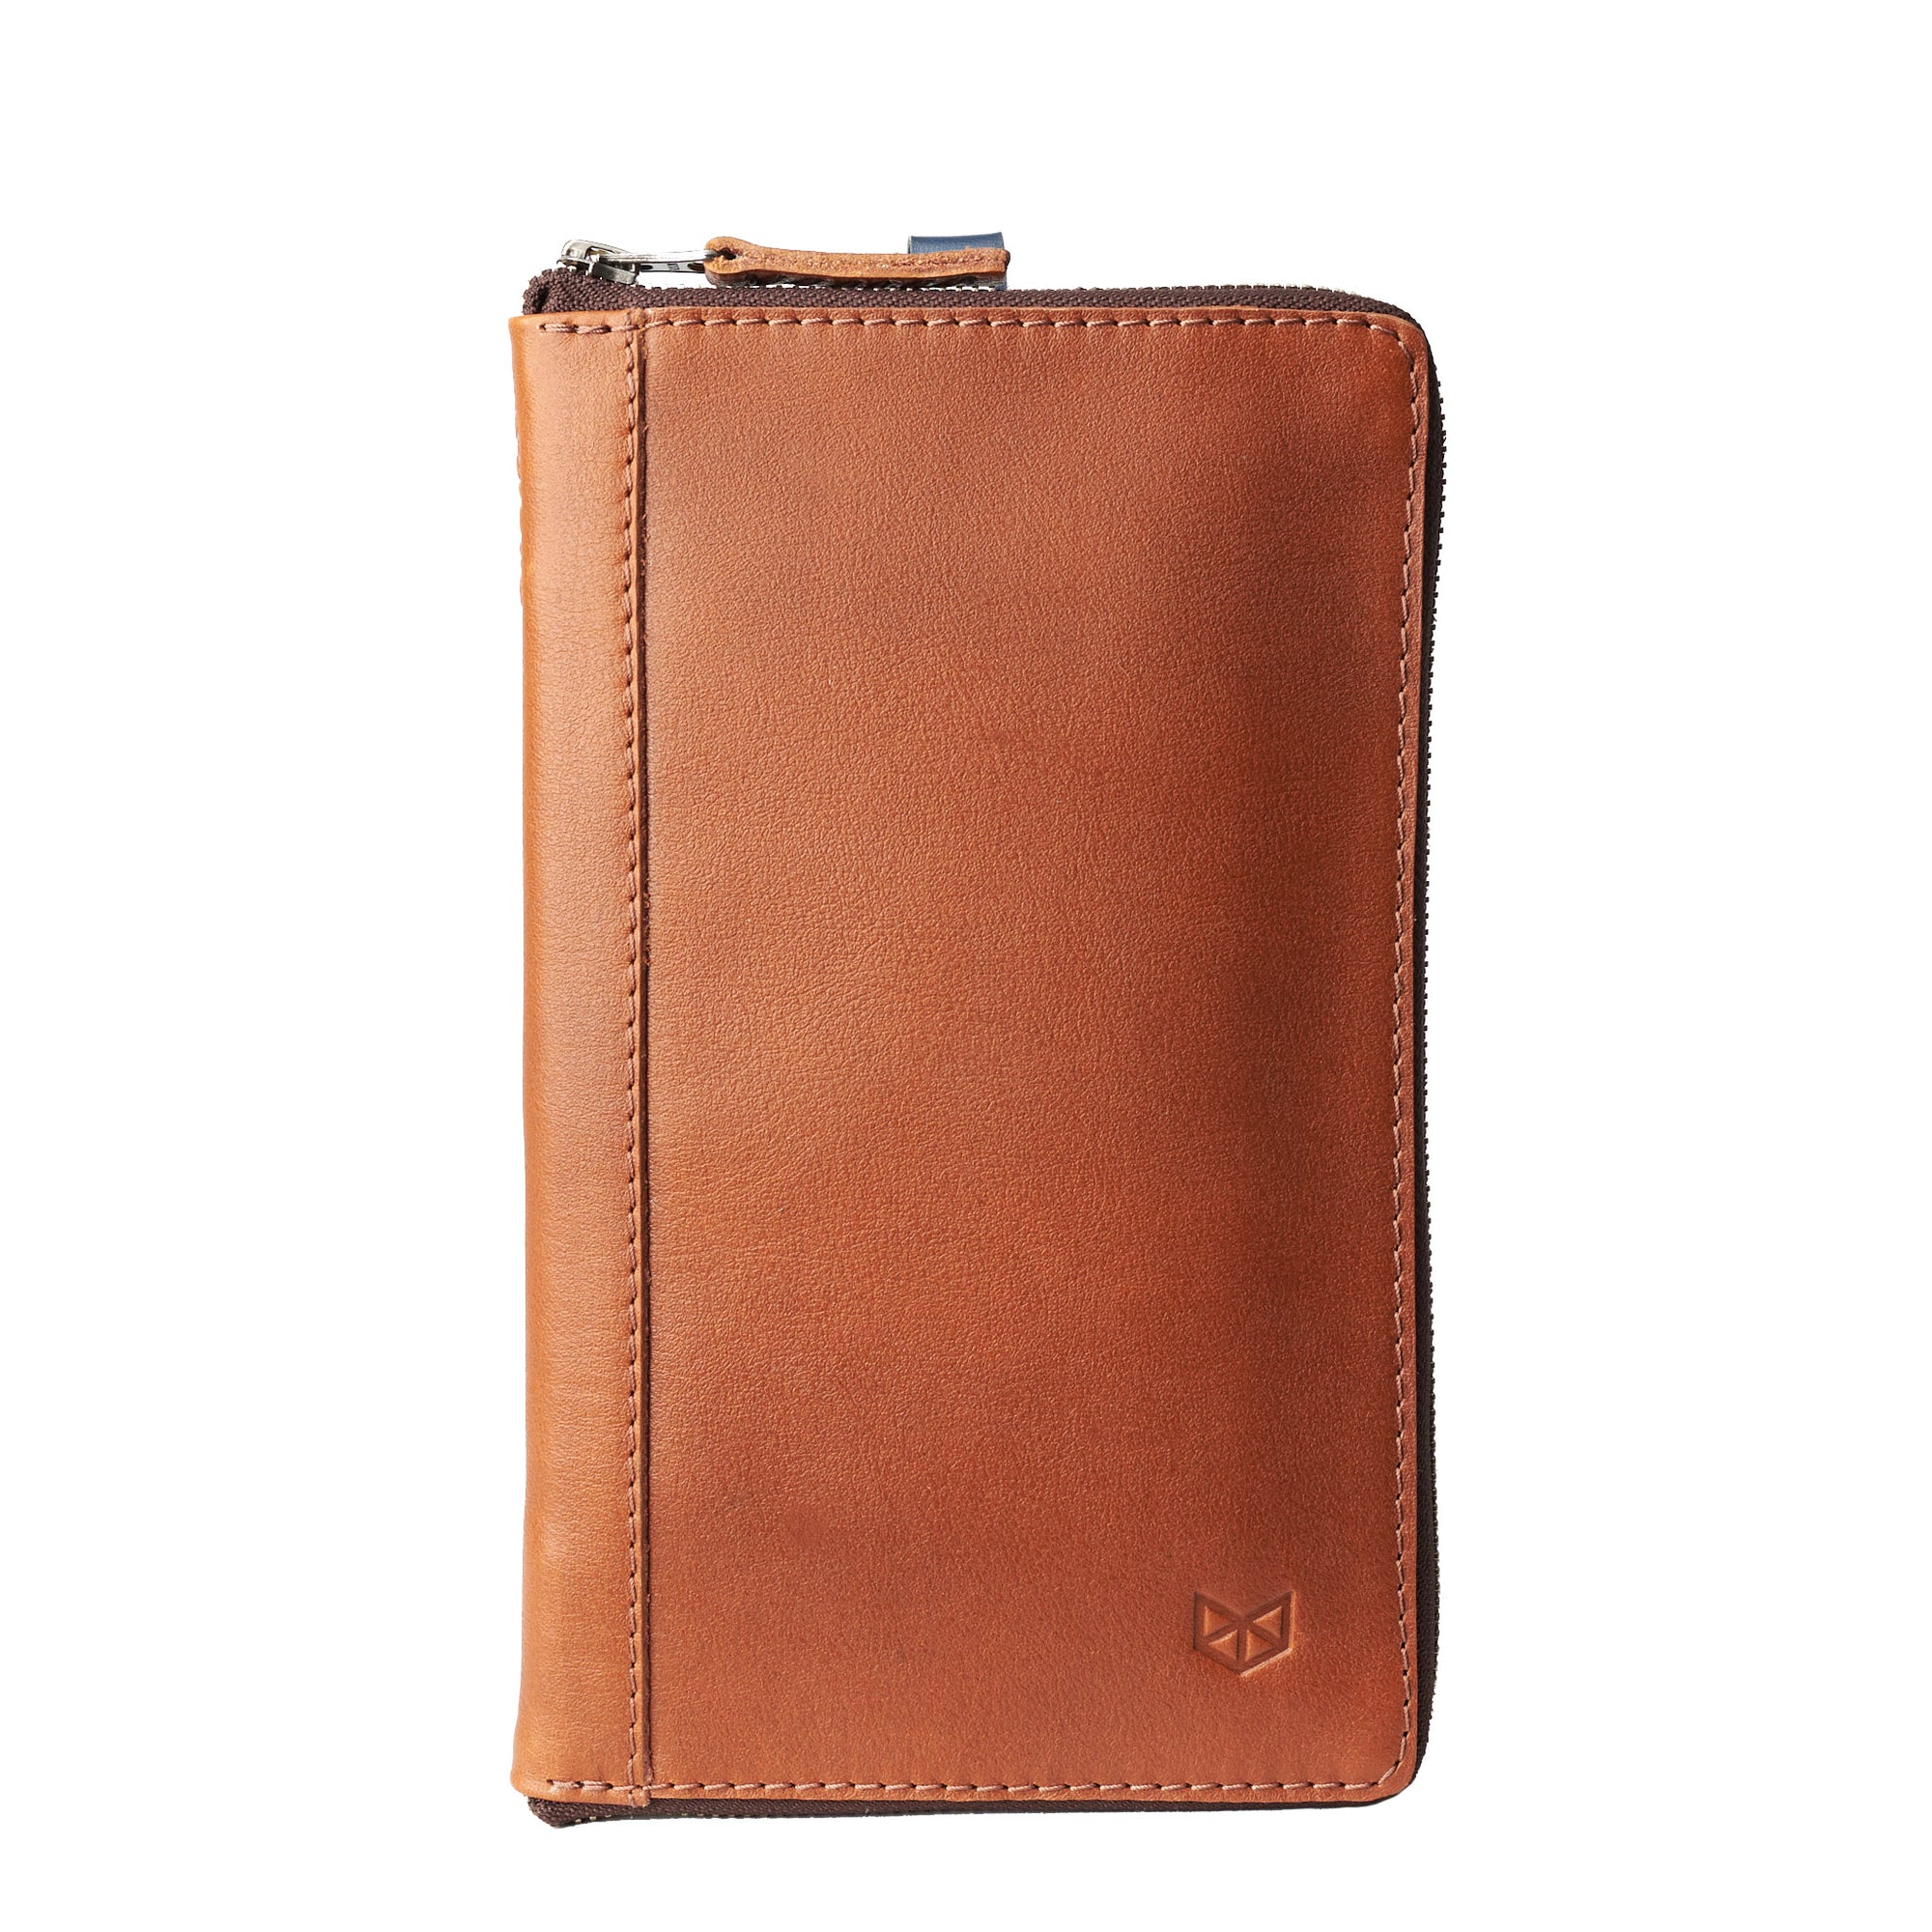 Front view. Tan leather passport holder. Airport travel leather organizer accessories. Leather good craft by Capra Leather.